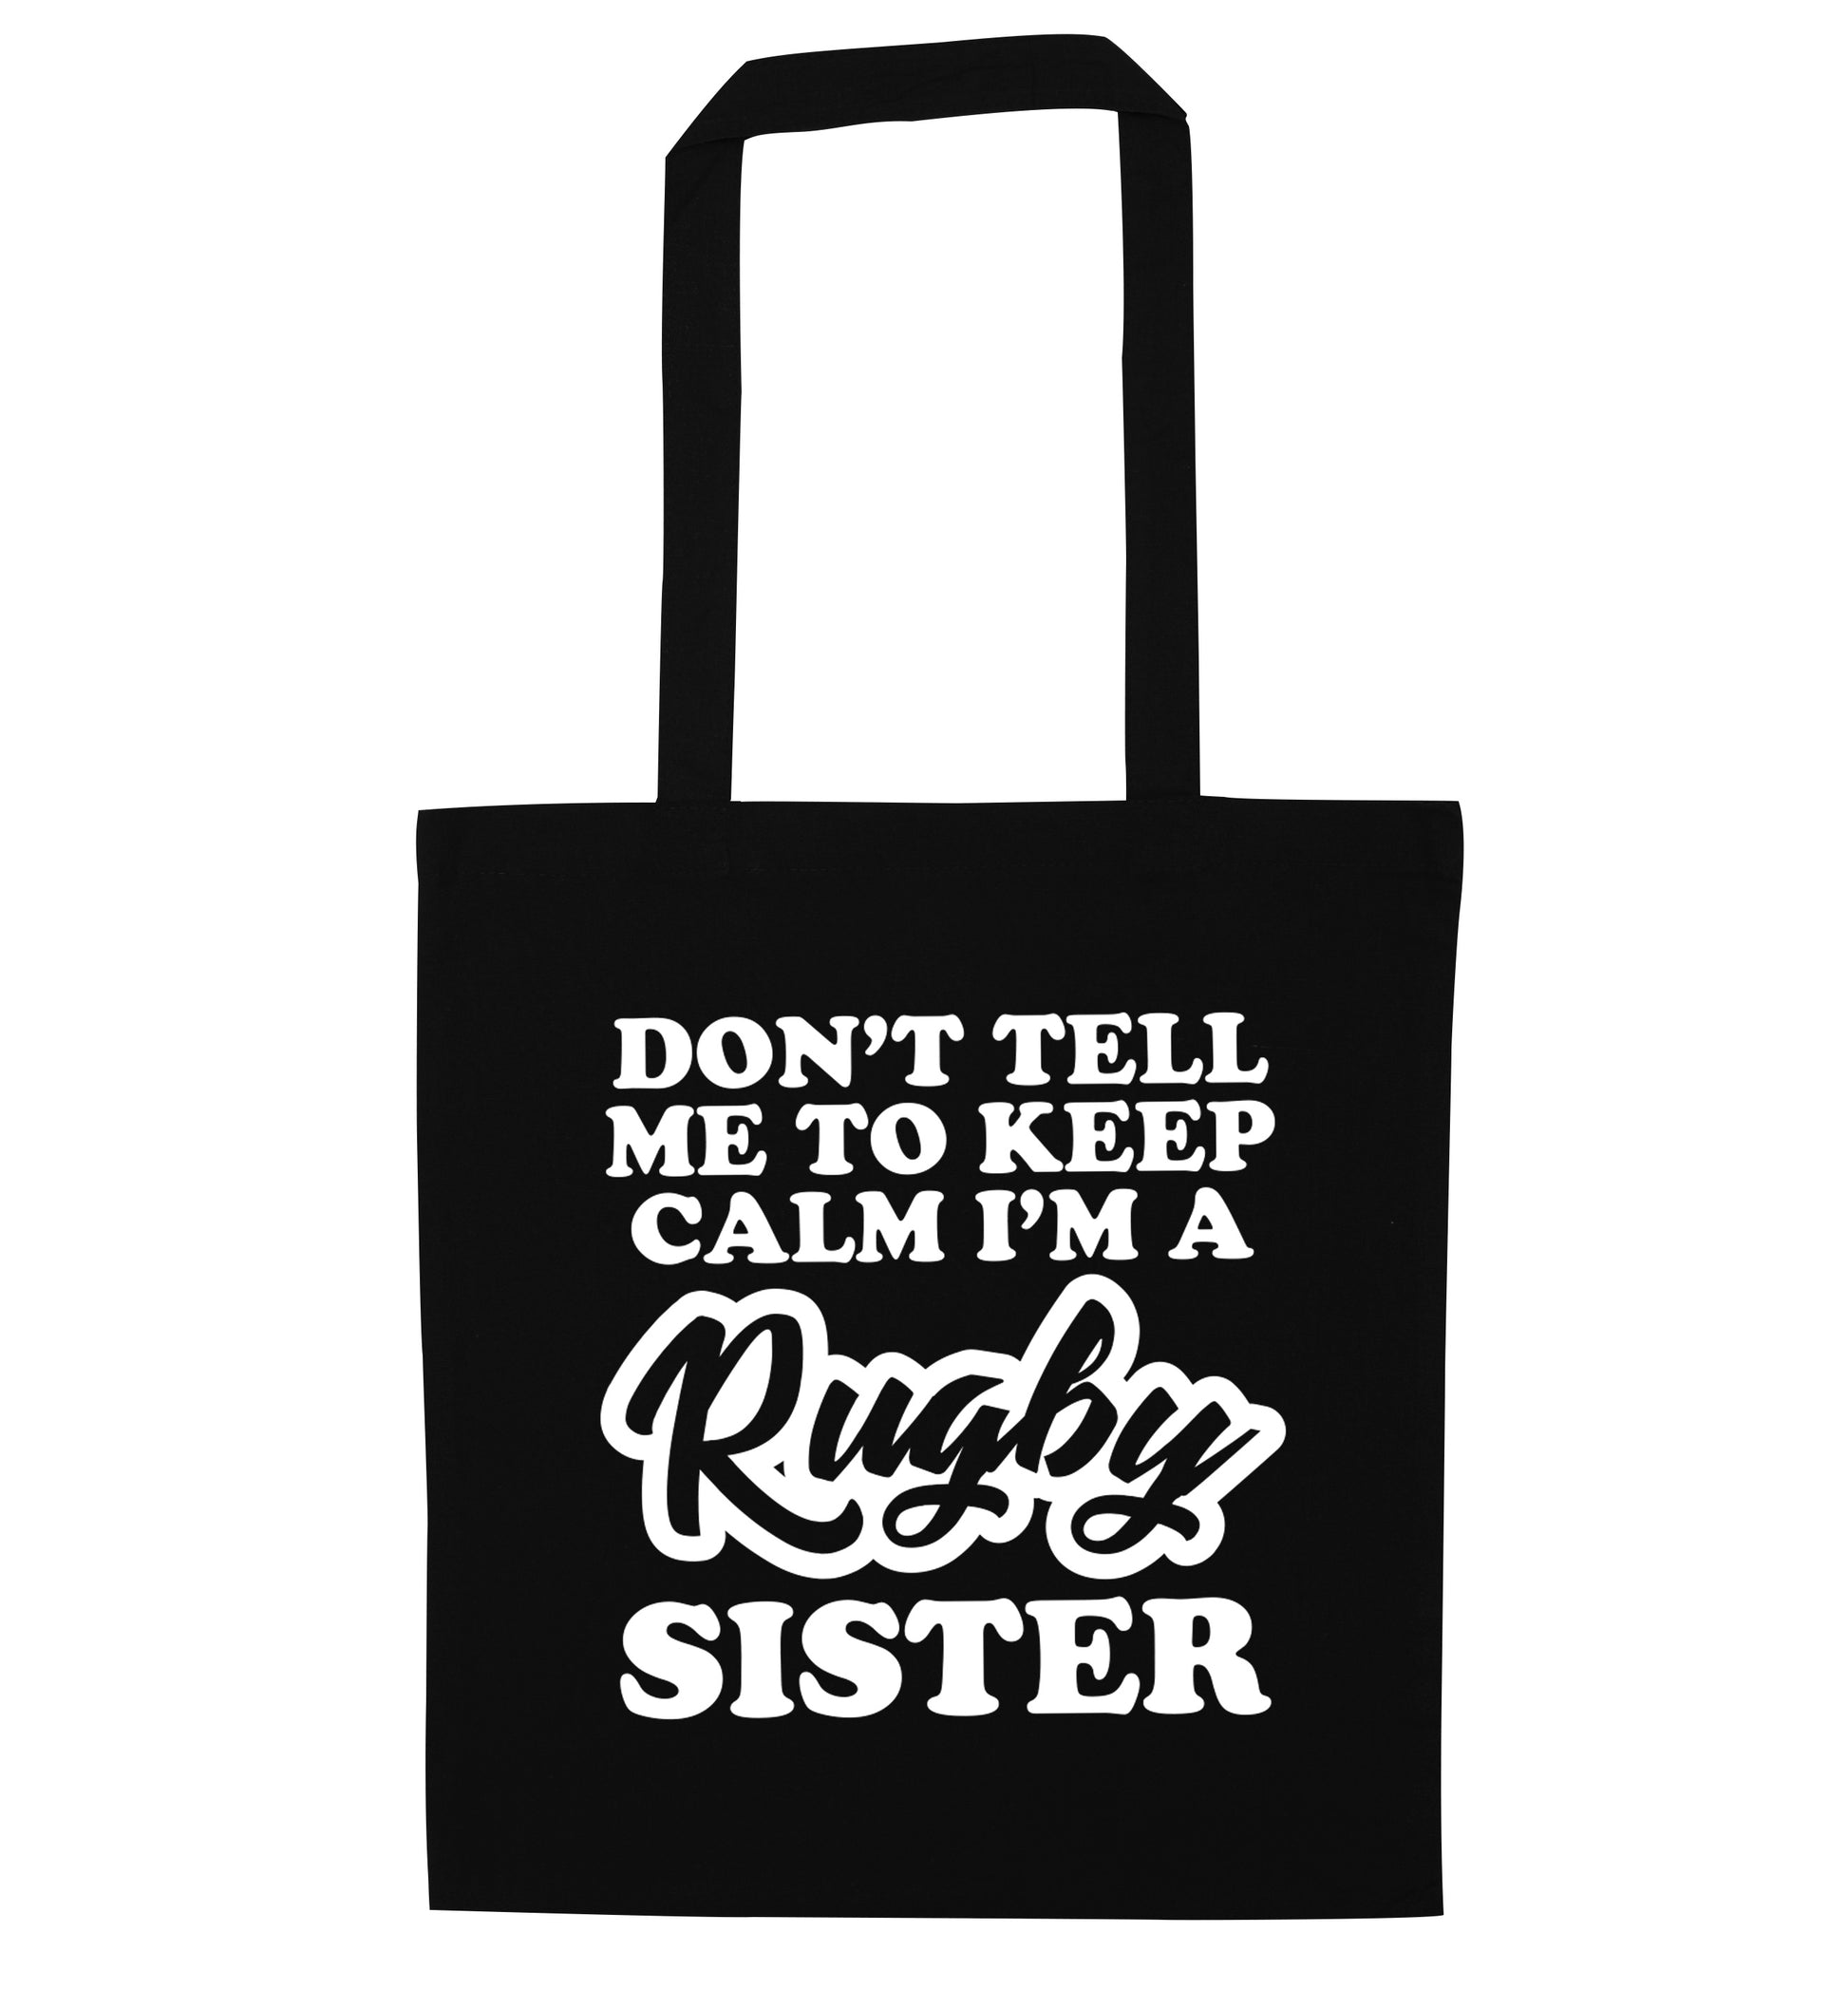 Don't tell me keep calm I'm a rugby sister black tote bag